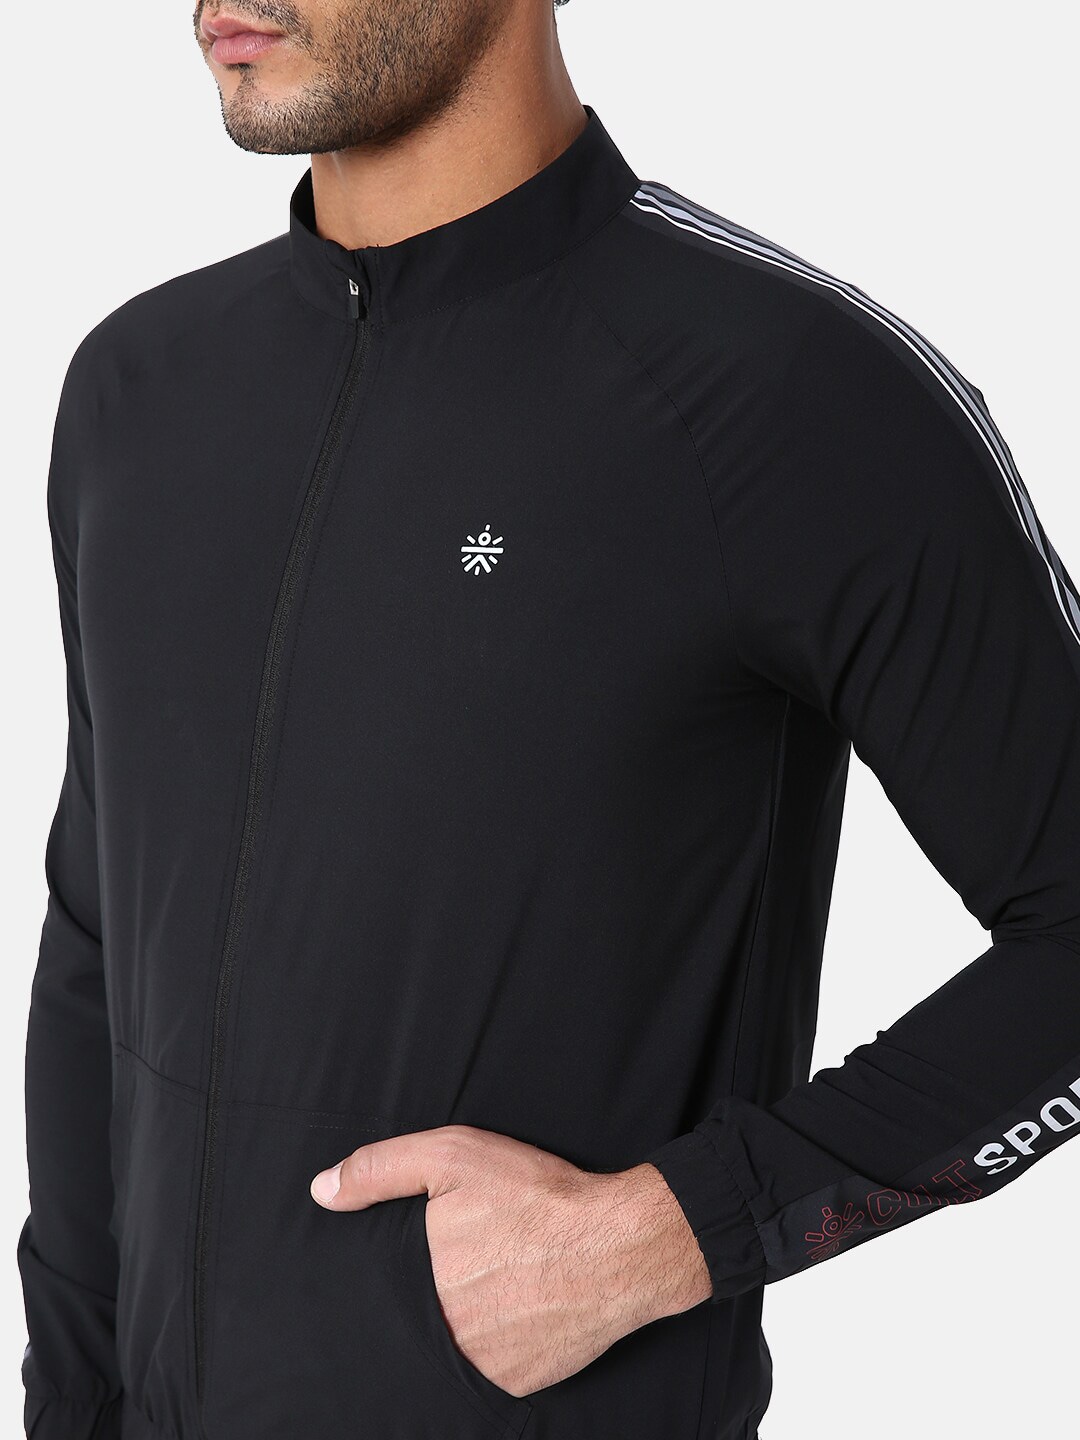 Clothing Tracksuits | Cultsport Men Black Solid Tracksuit - VC32391